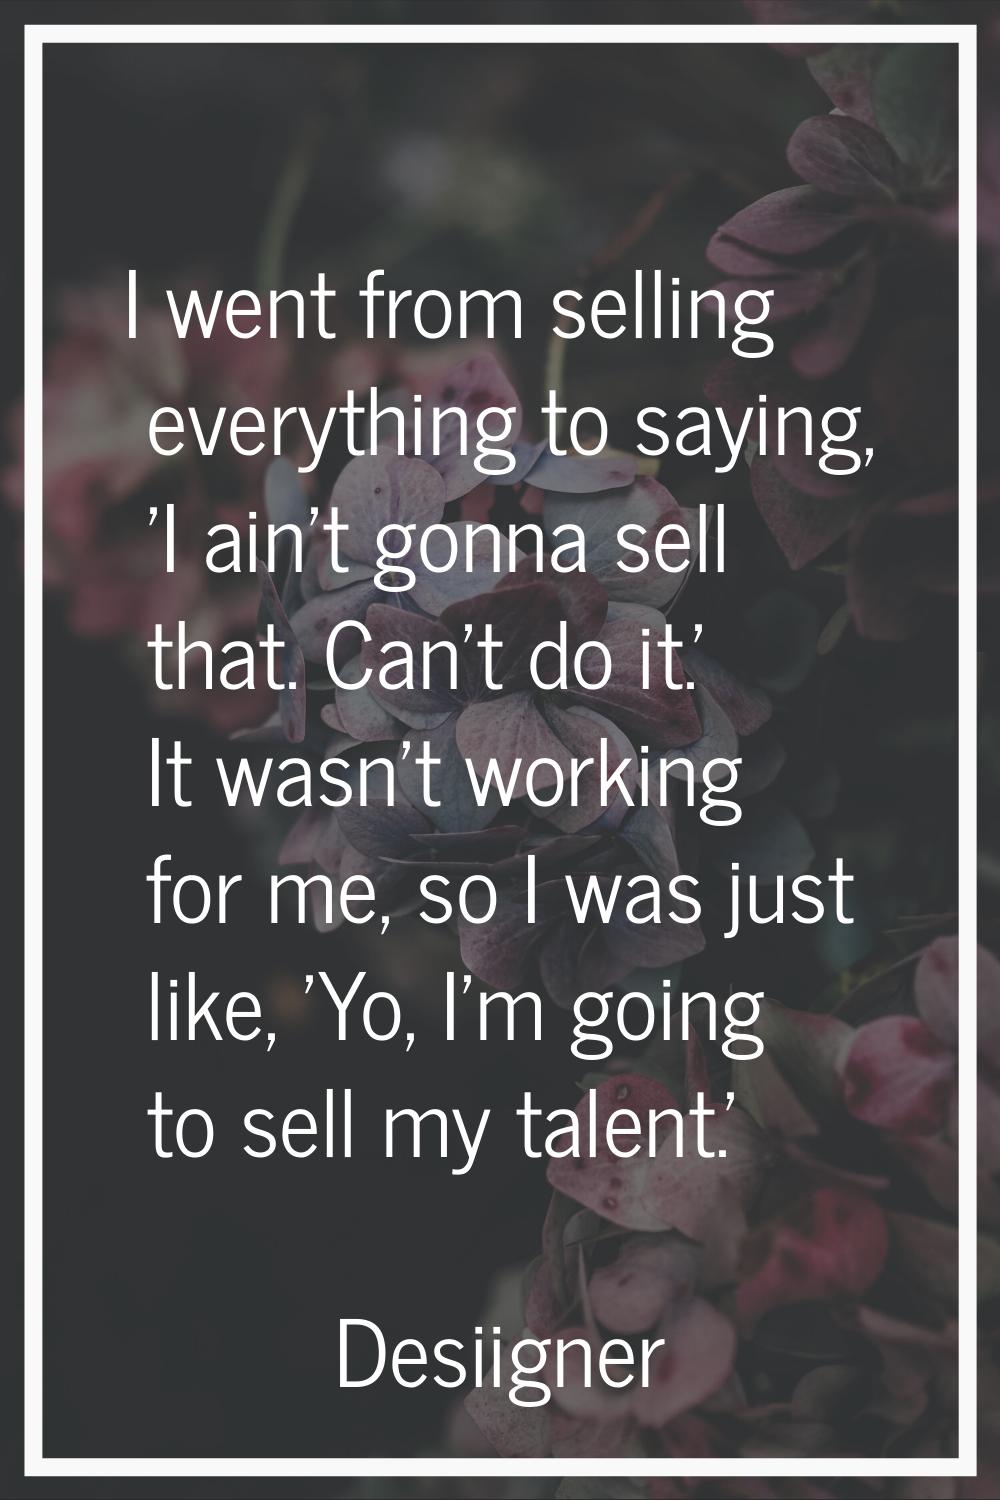 I went from selling everything to saying, 'I ain't gonna sell that. Can't do it.' It wasn't working